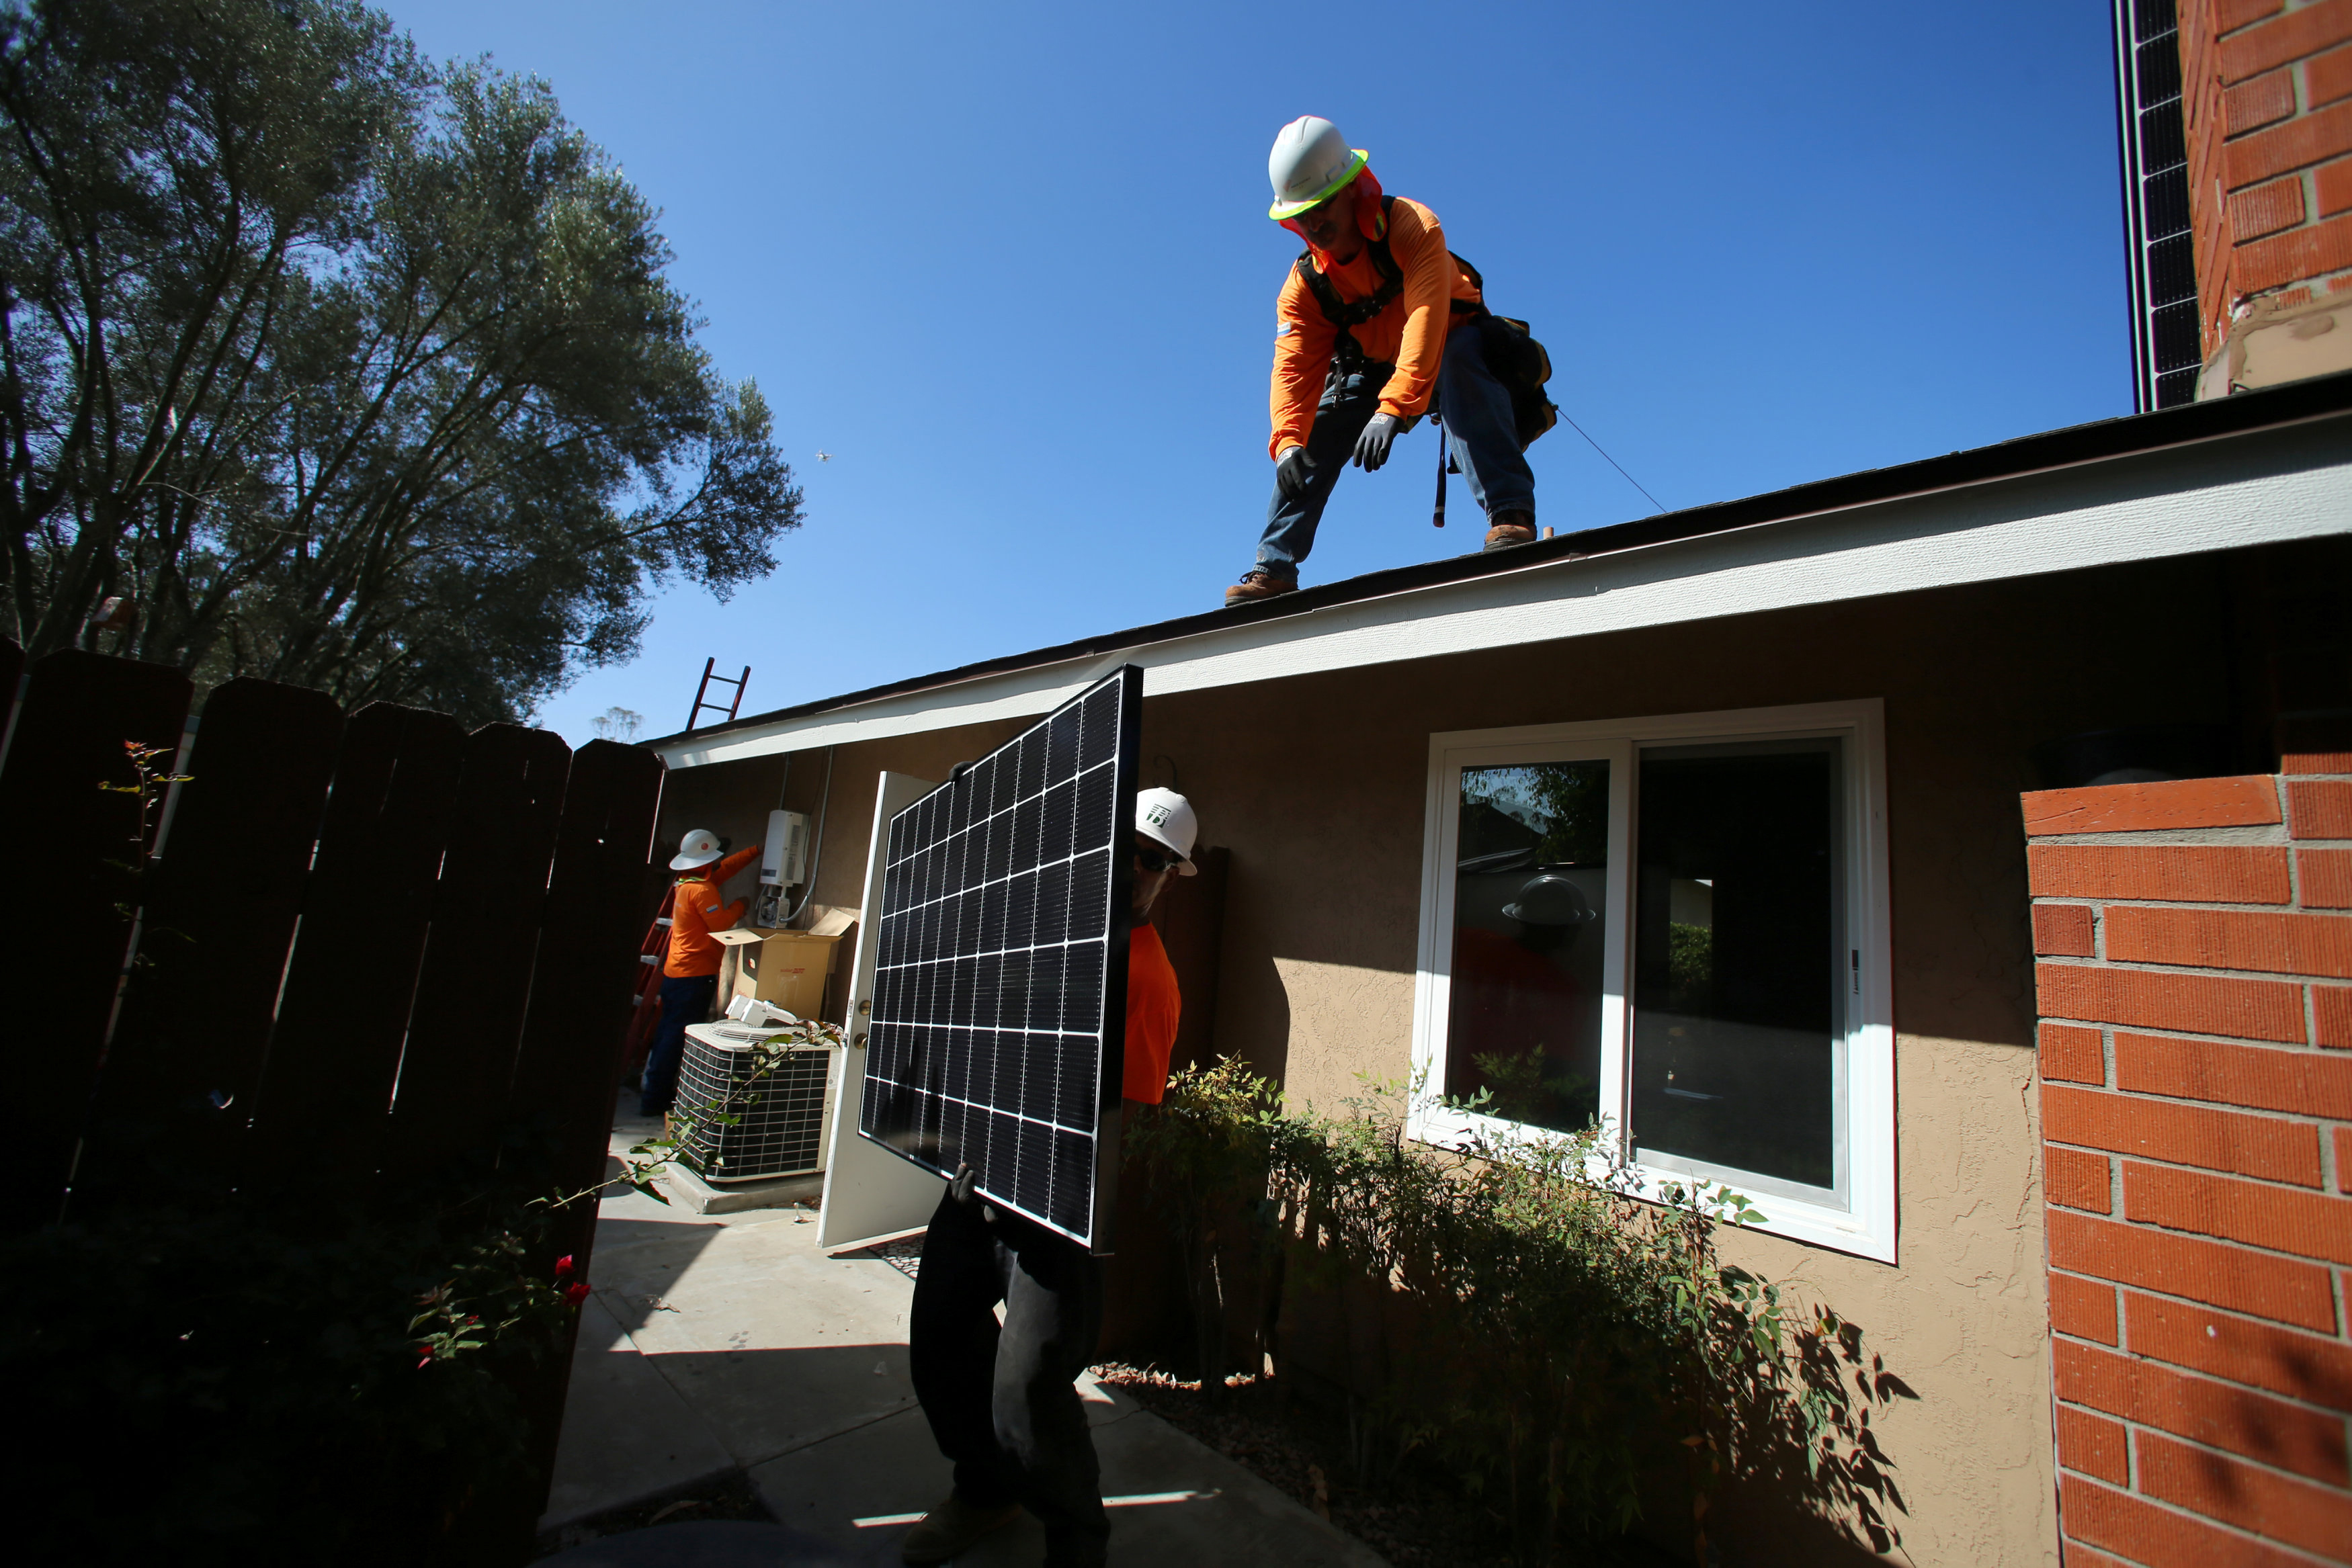 Workers install solar panels on the roof of a home in Scripps Ranch, northeastern San Diego, on Oct. 14. | REUTERS